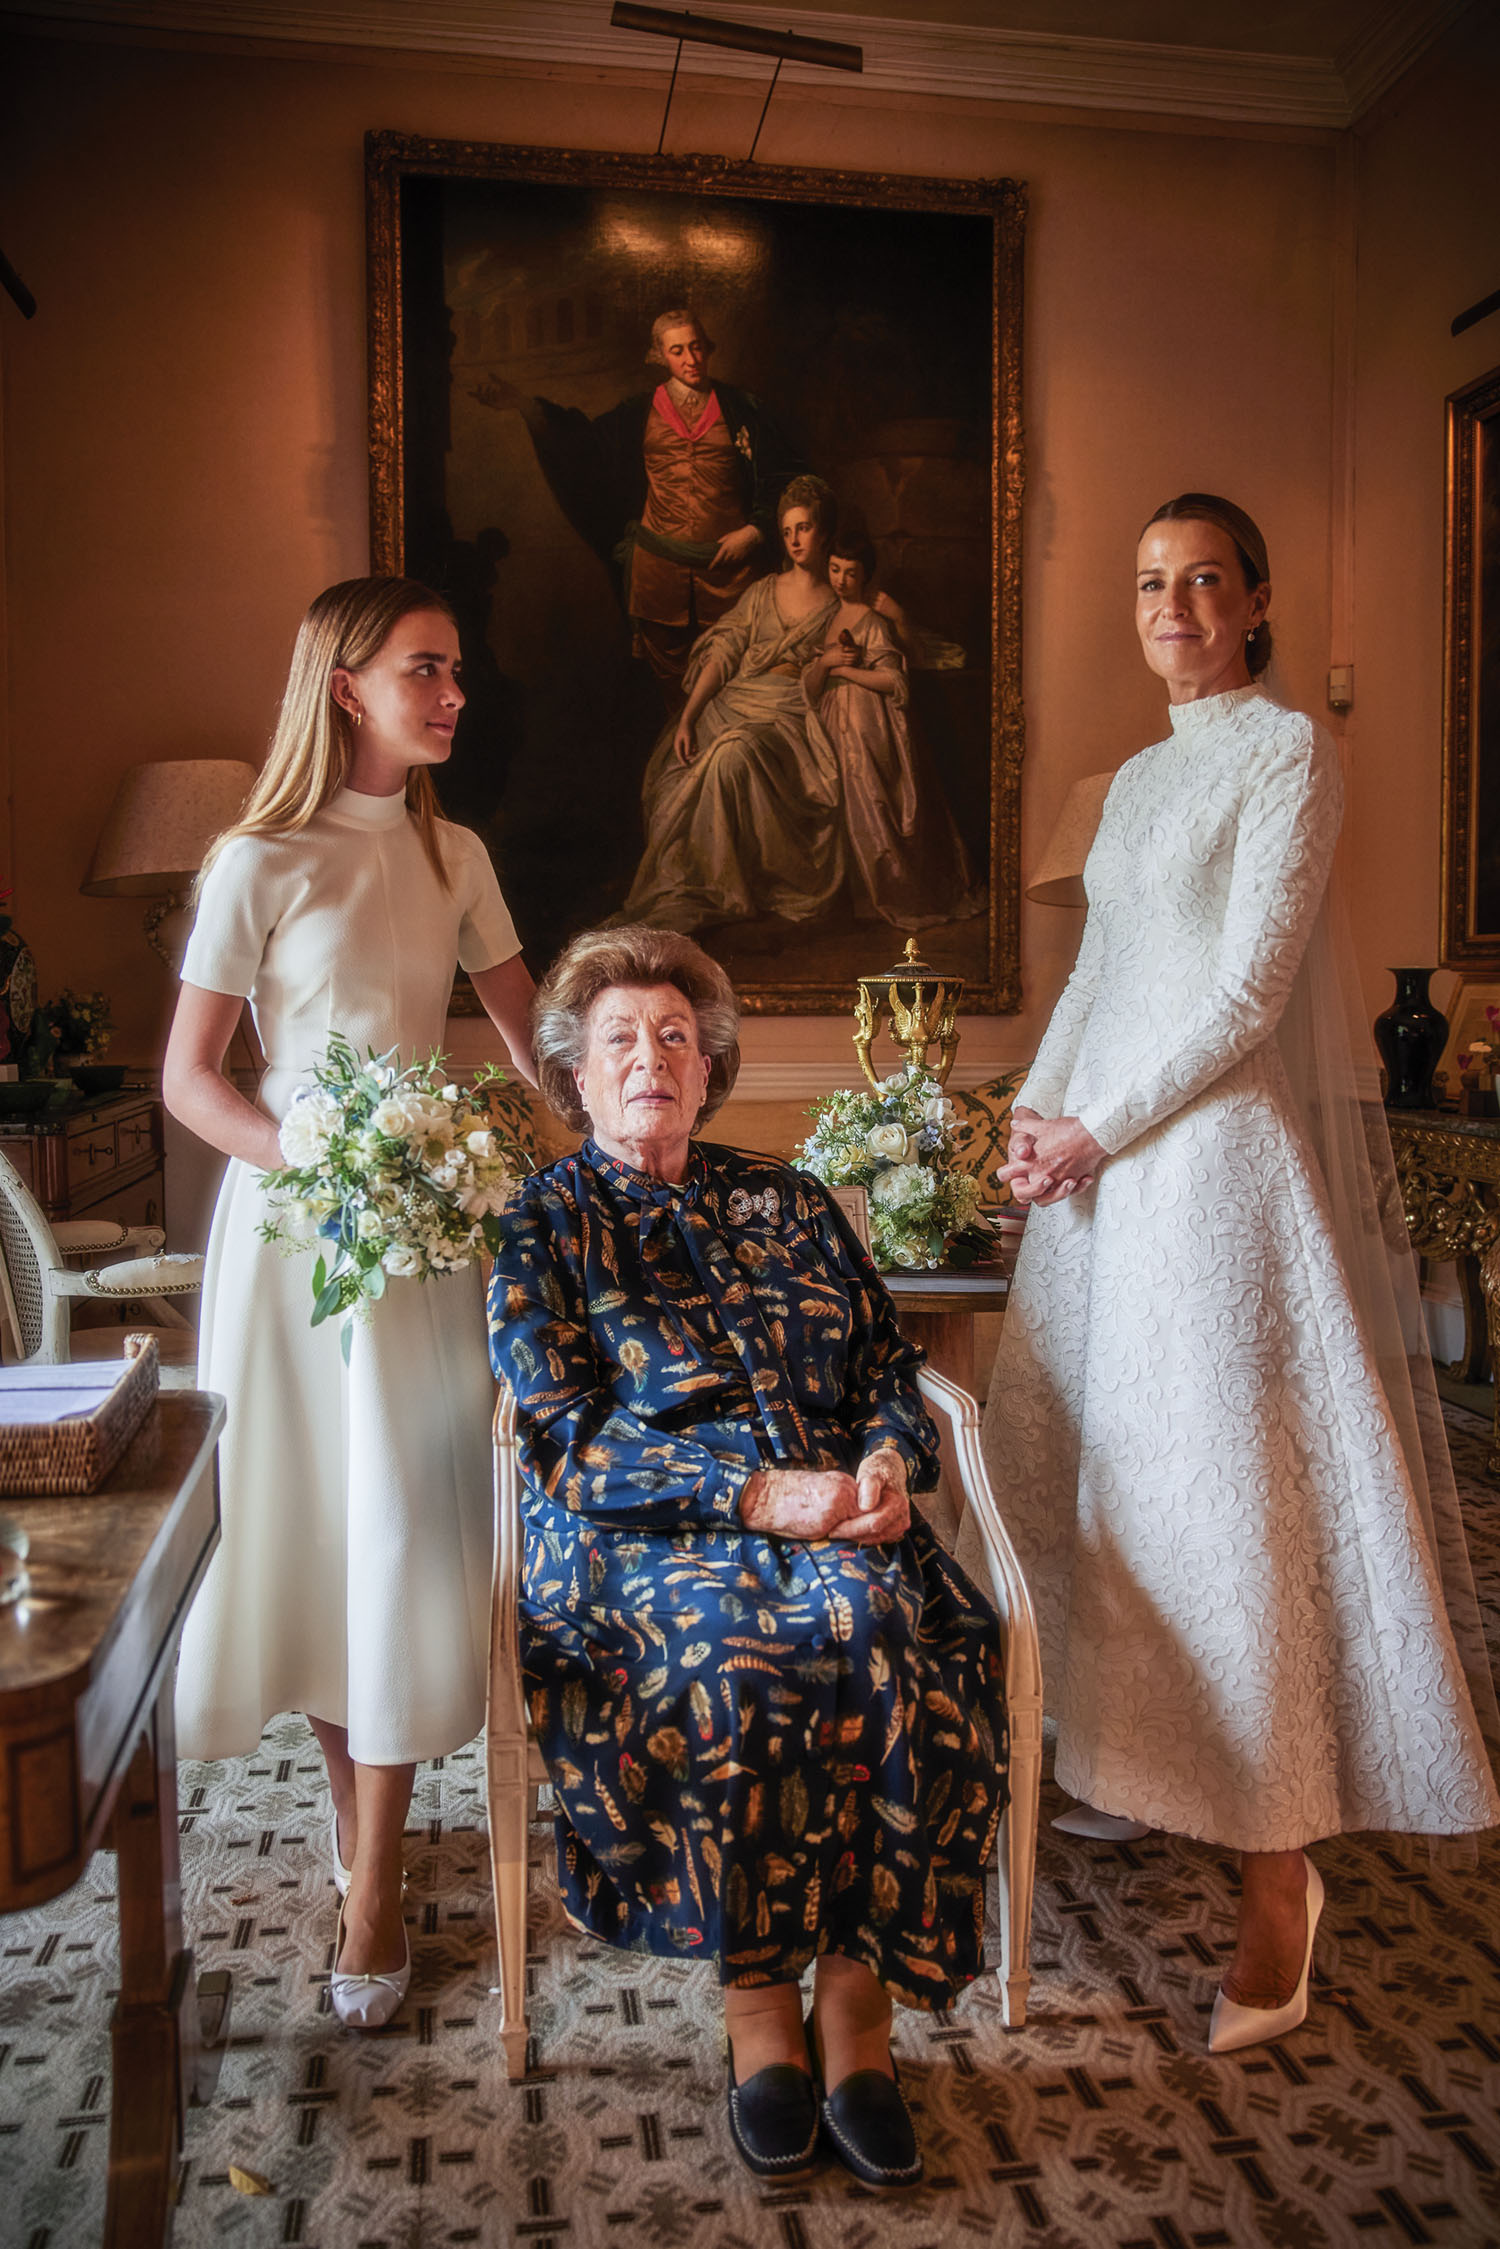 Three generations—India’s daughter and chief bridesmaid, Domino; India’s mother, Lady Pamela Hicks; and India—gather before the ceremony for formal portraits.